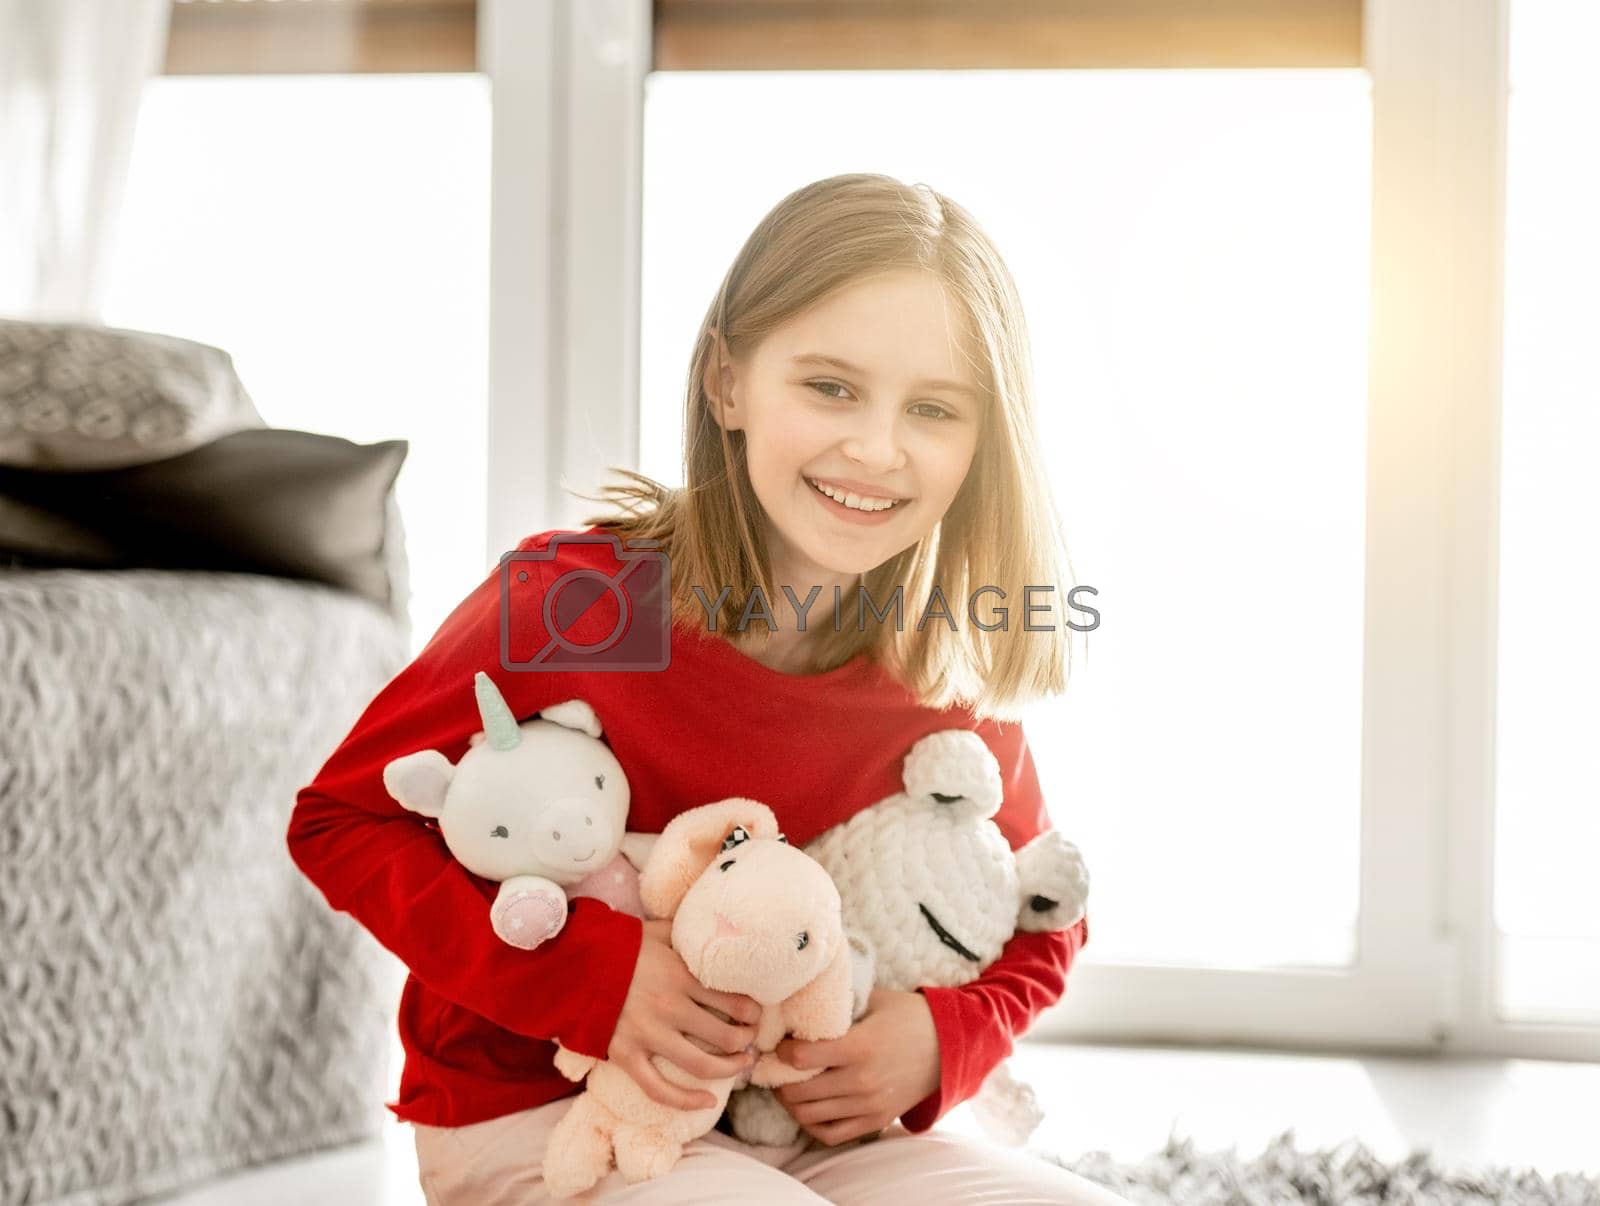 Royalty free image of Girl with toys in bedroom by tan4ikk1